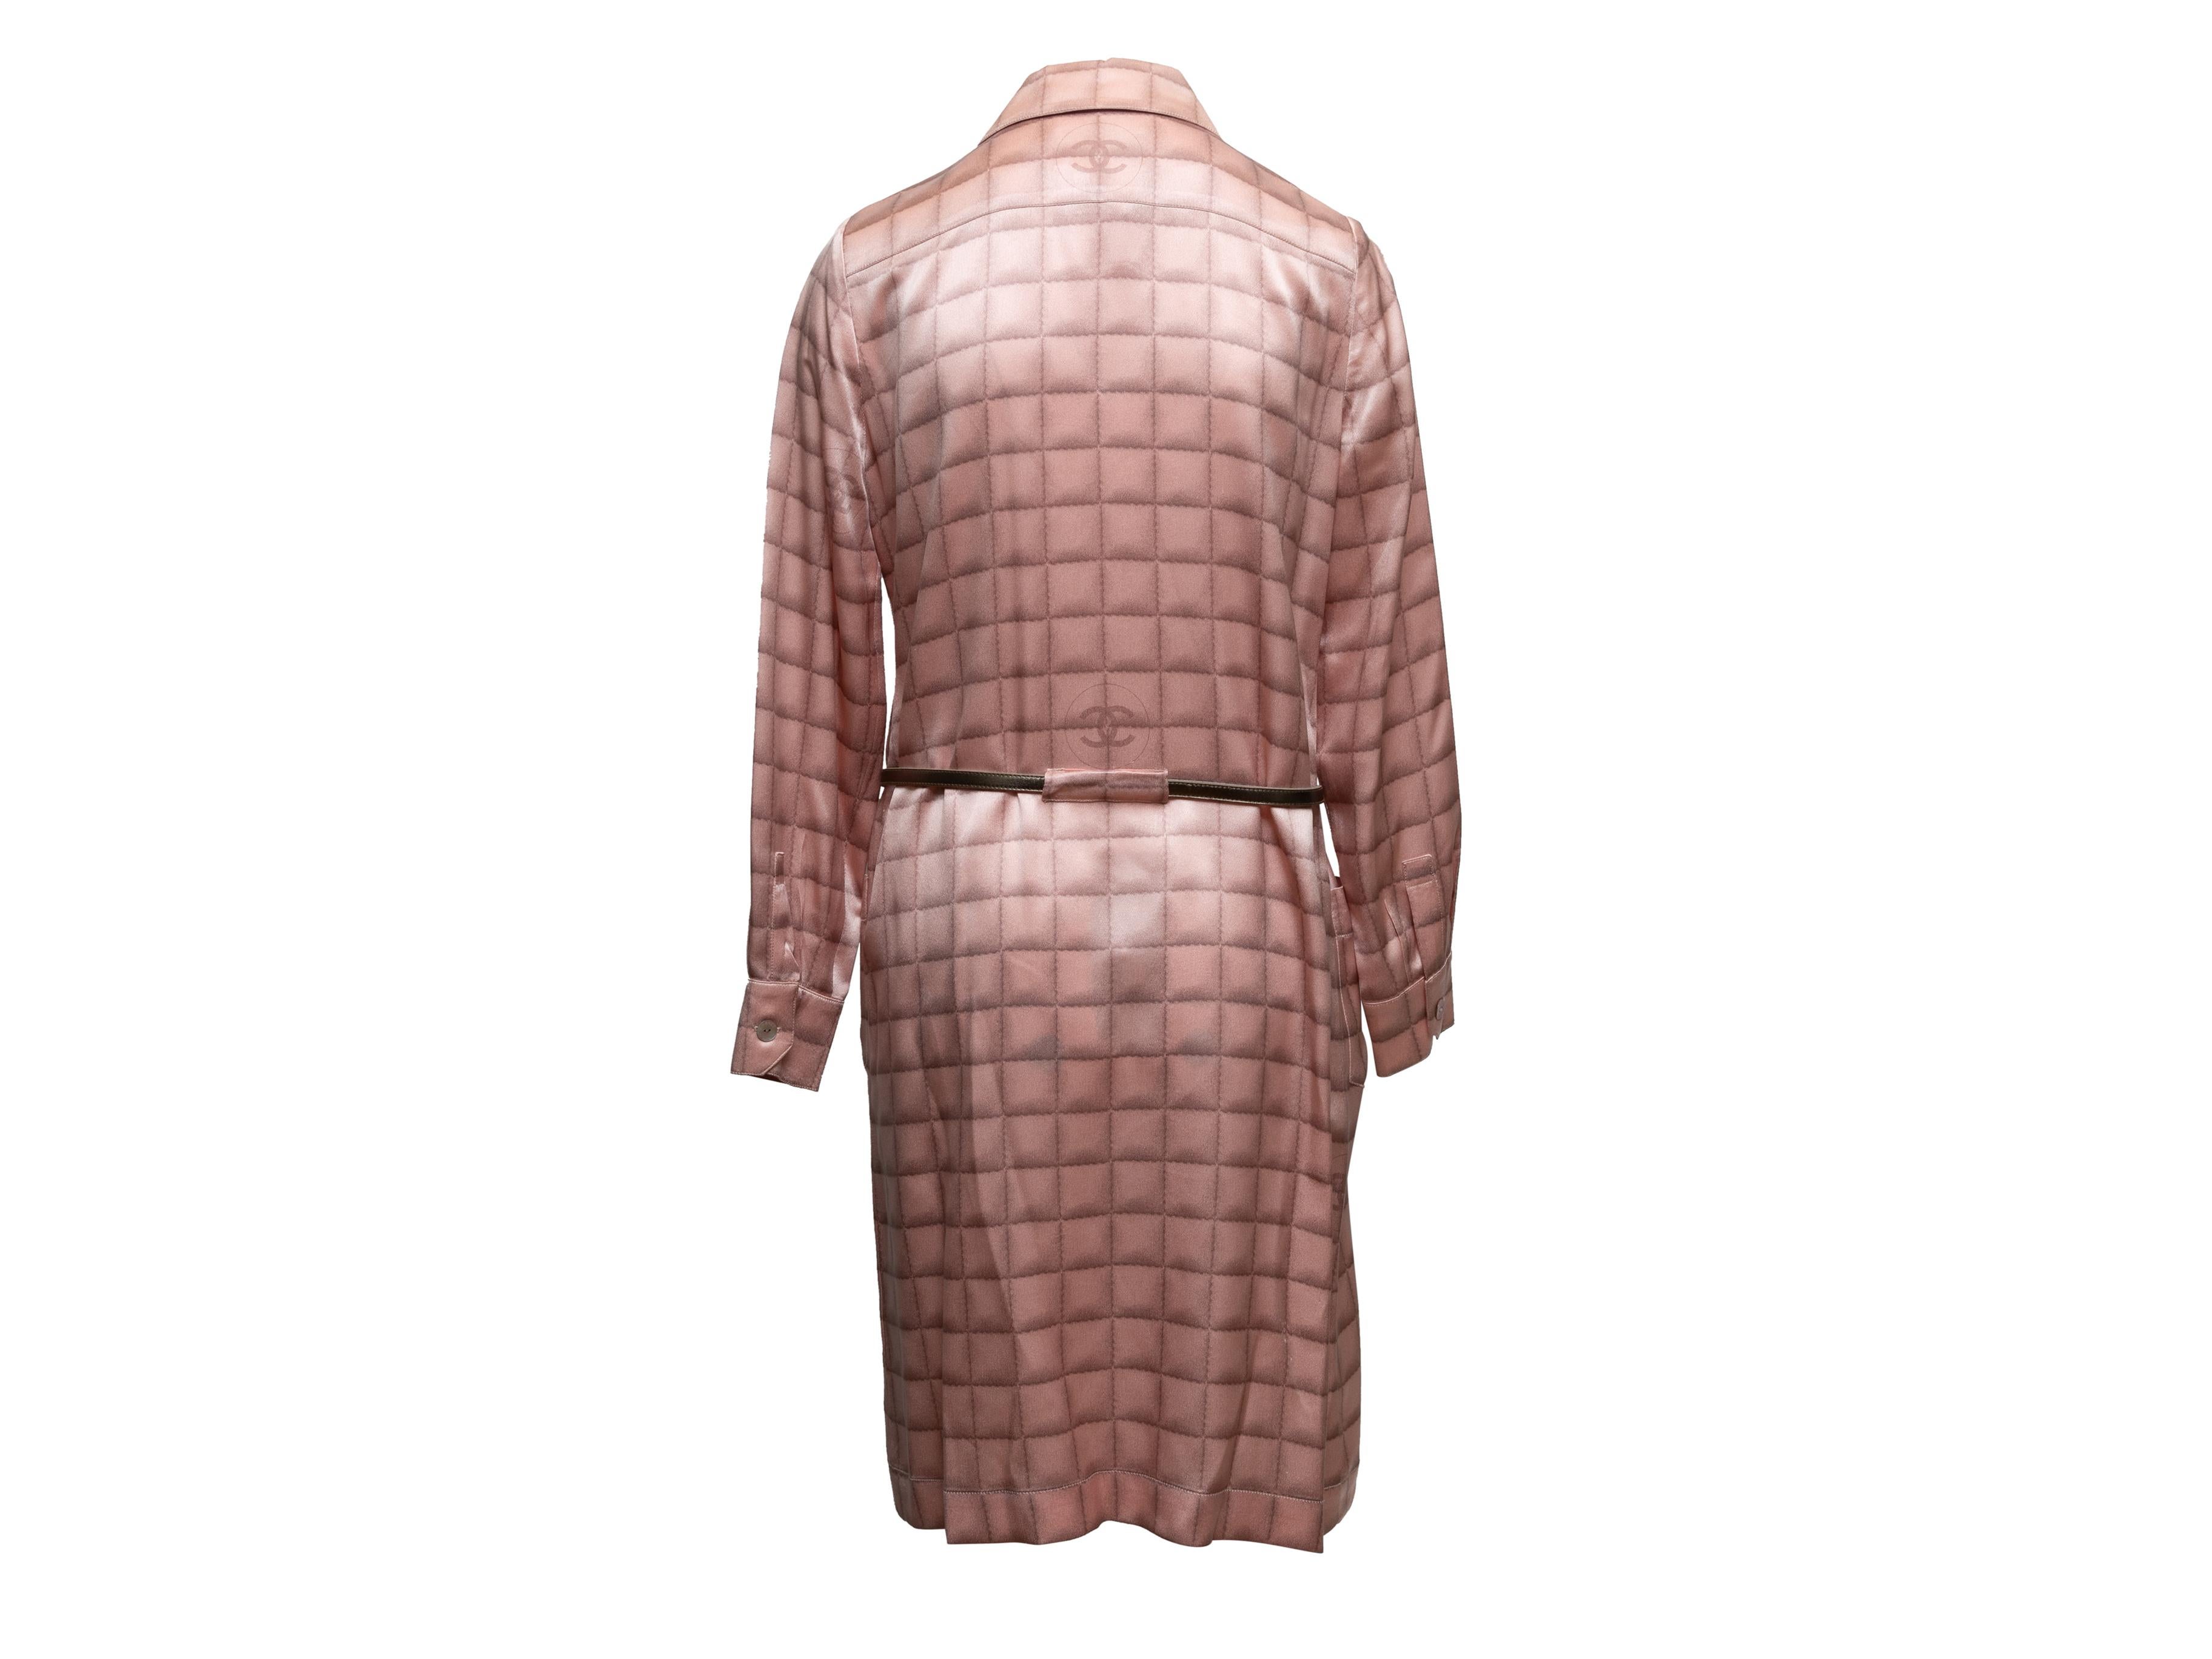 Vintage light pink printed silk dress by Chanel. From the Fall/Winter 2000 Collection. Pointed collar. Long sleeves. Four pockets. Belt at waist. Concealed button closures. 40